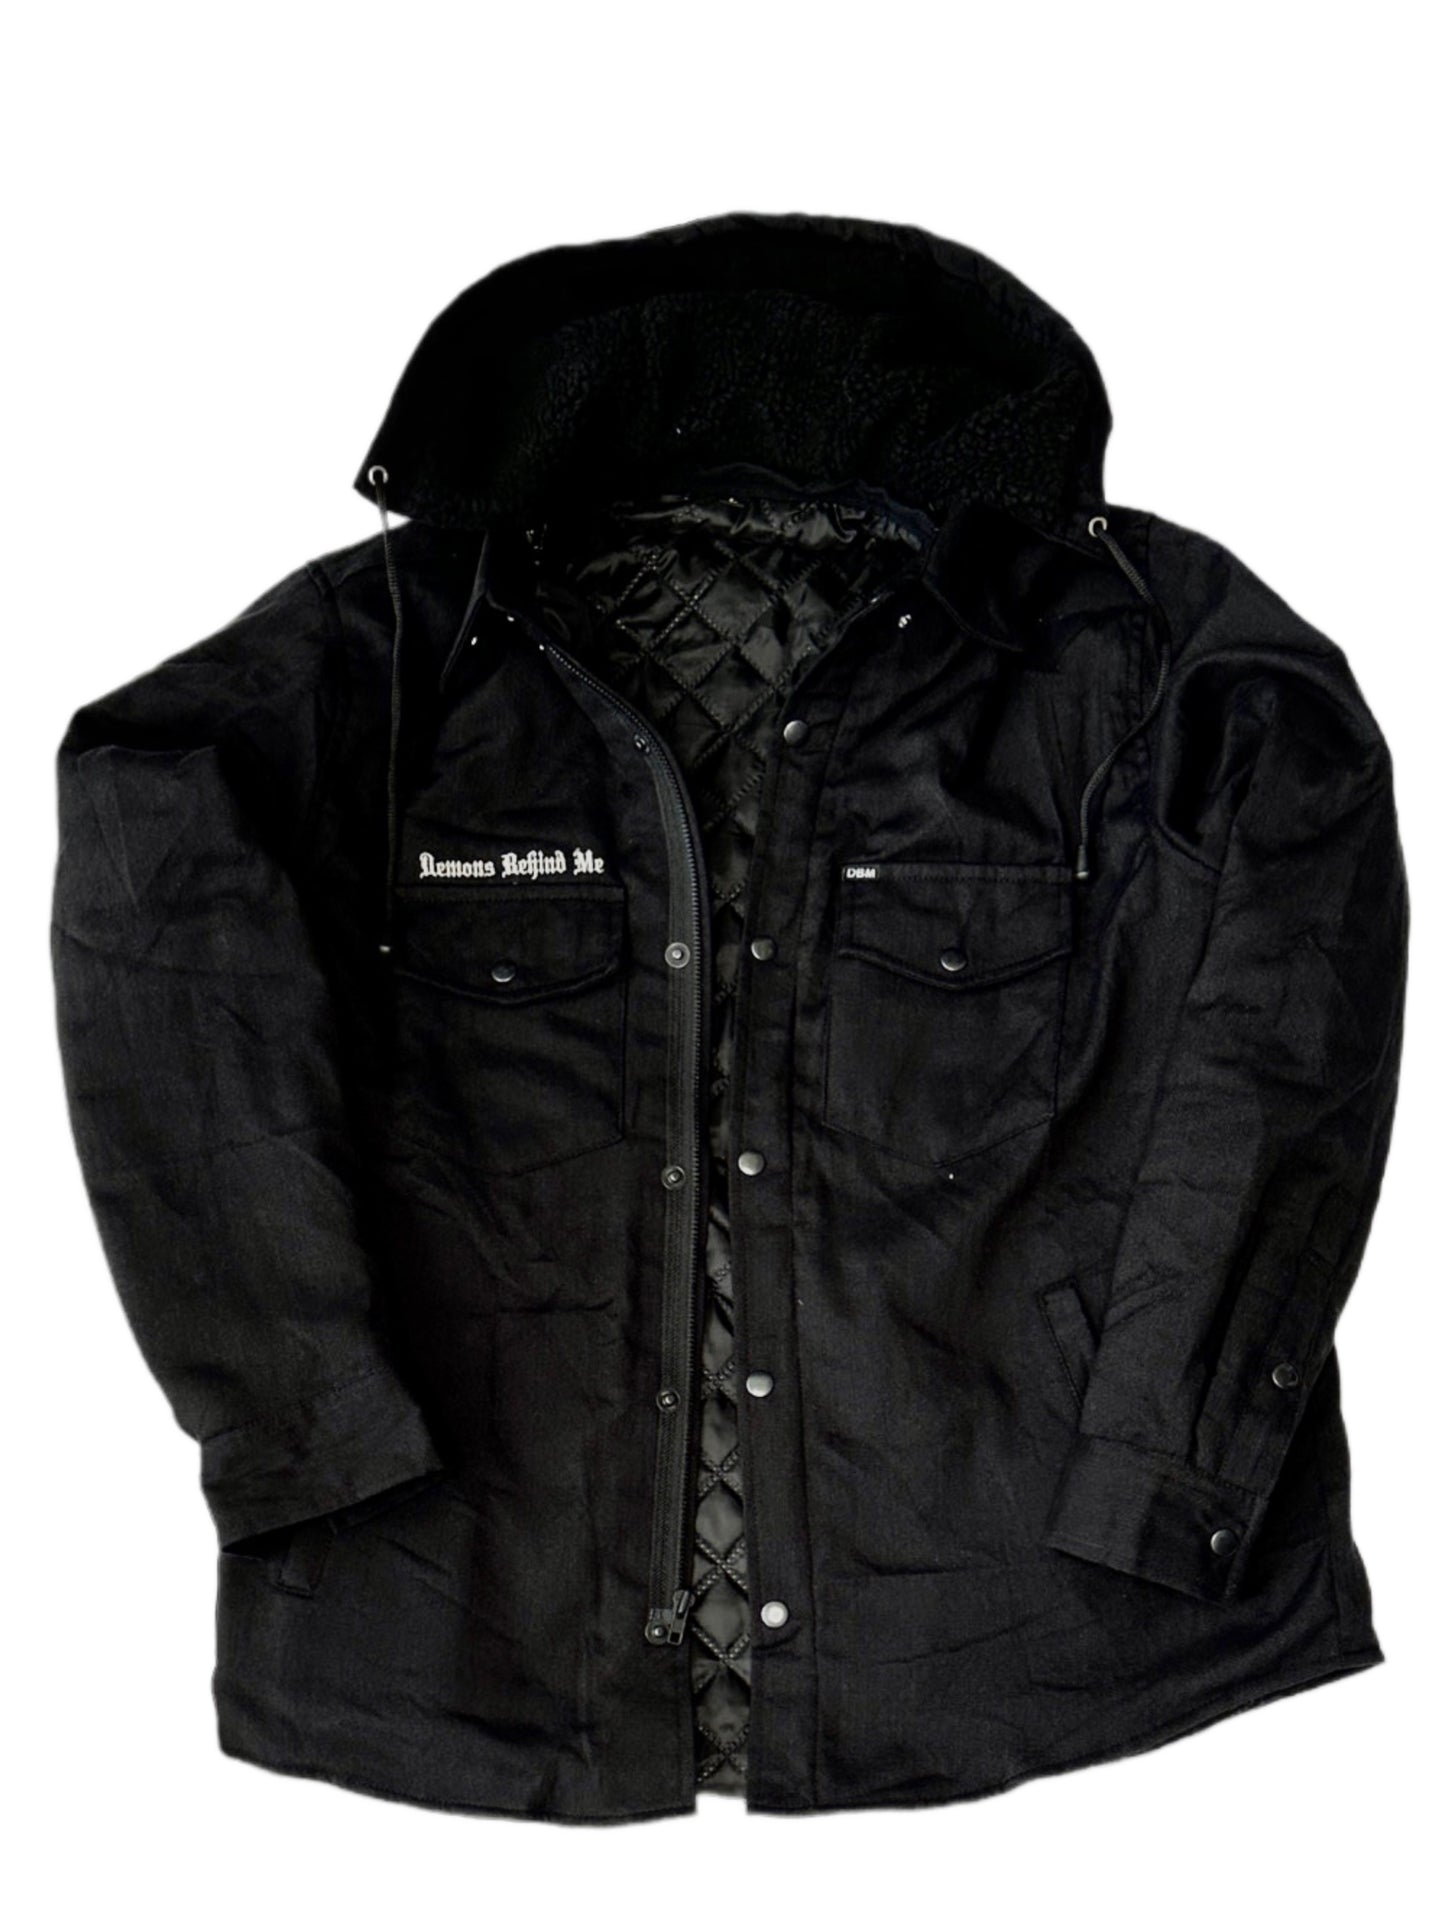 NEW! Heavy-Duty Black Embroidered Jacket (Removable Hood)